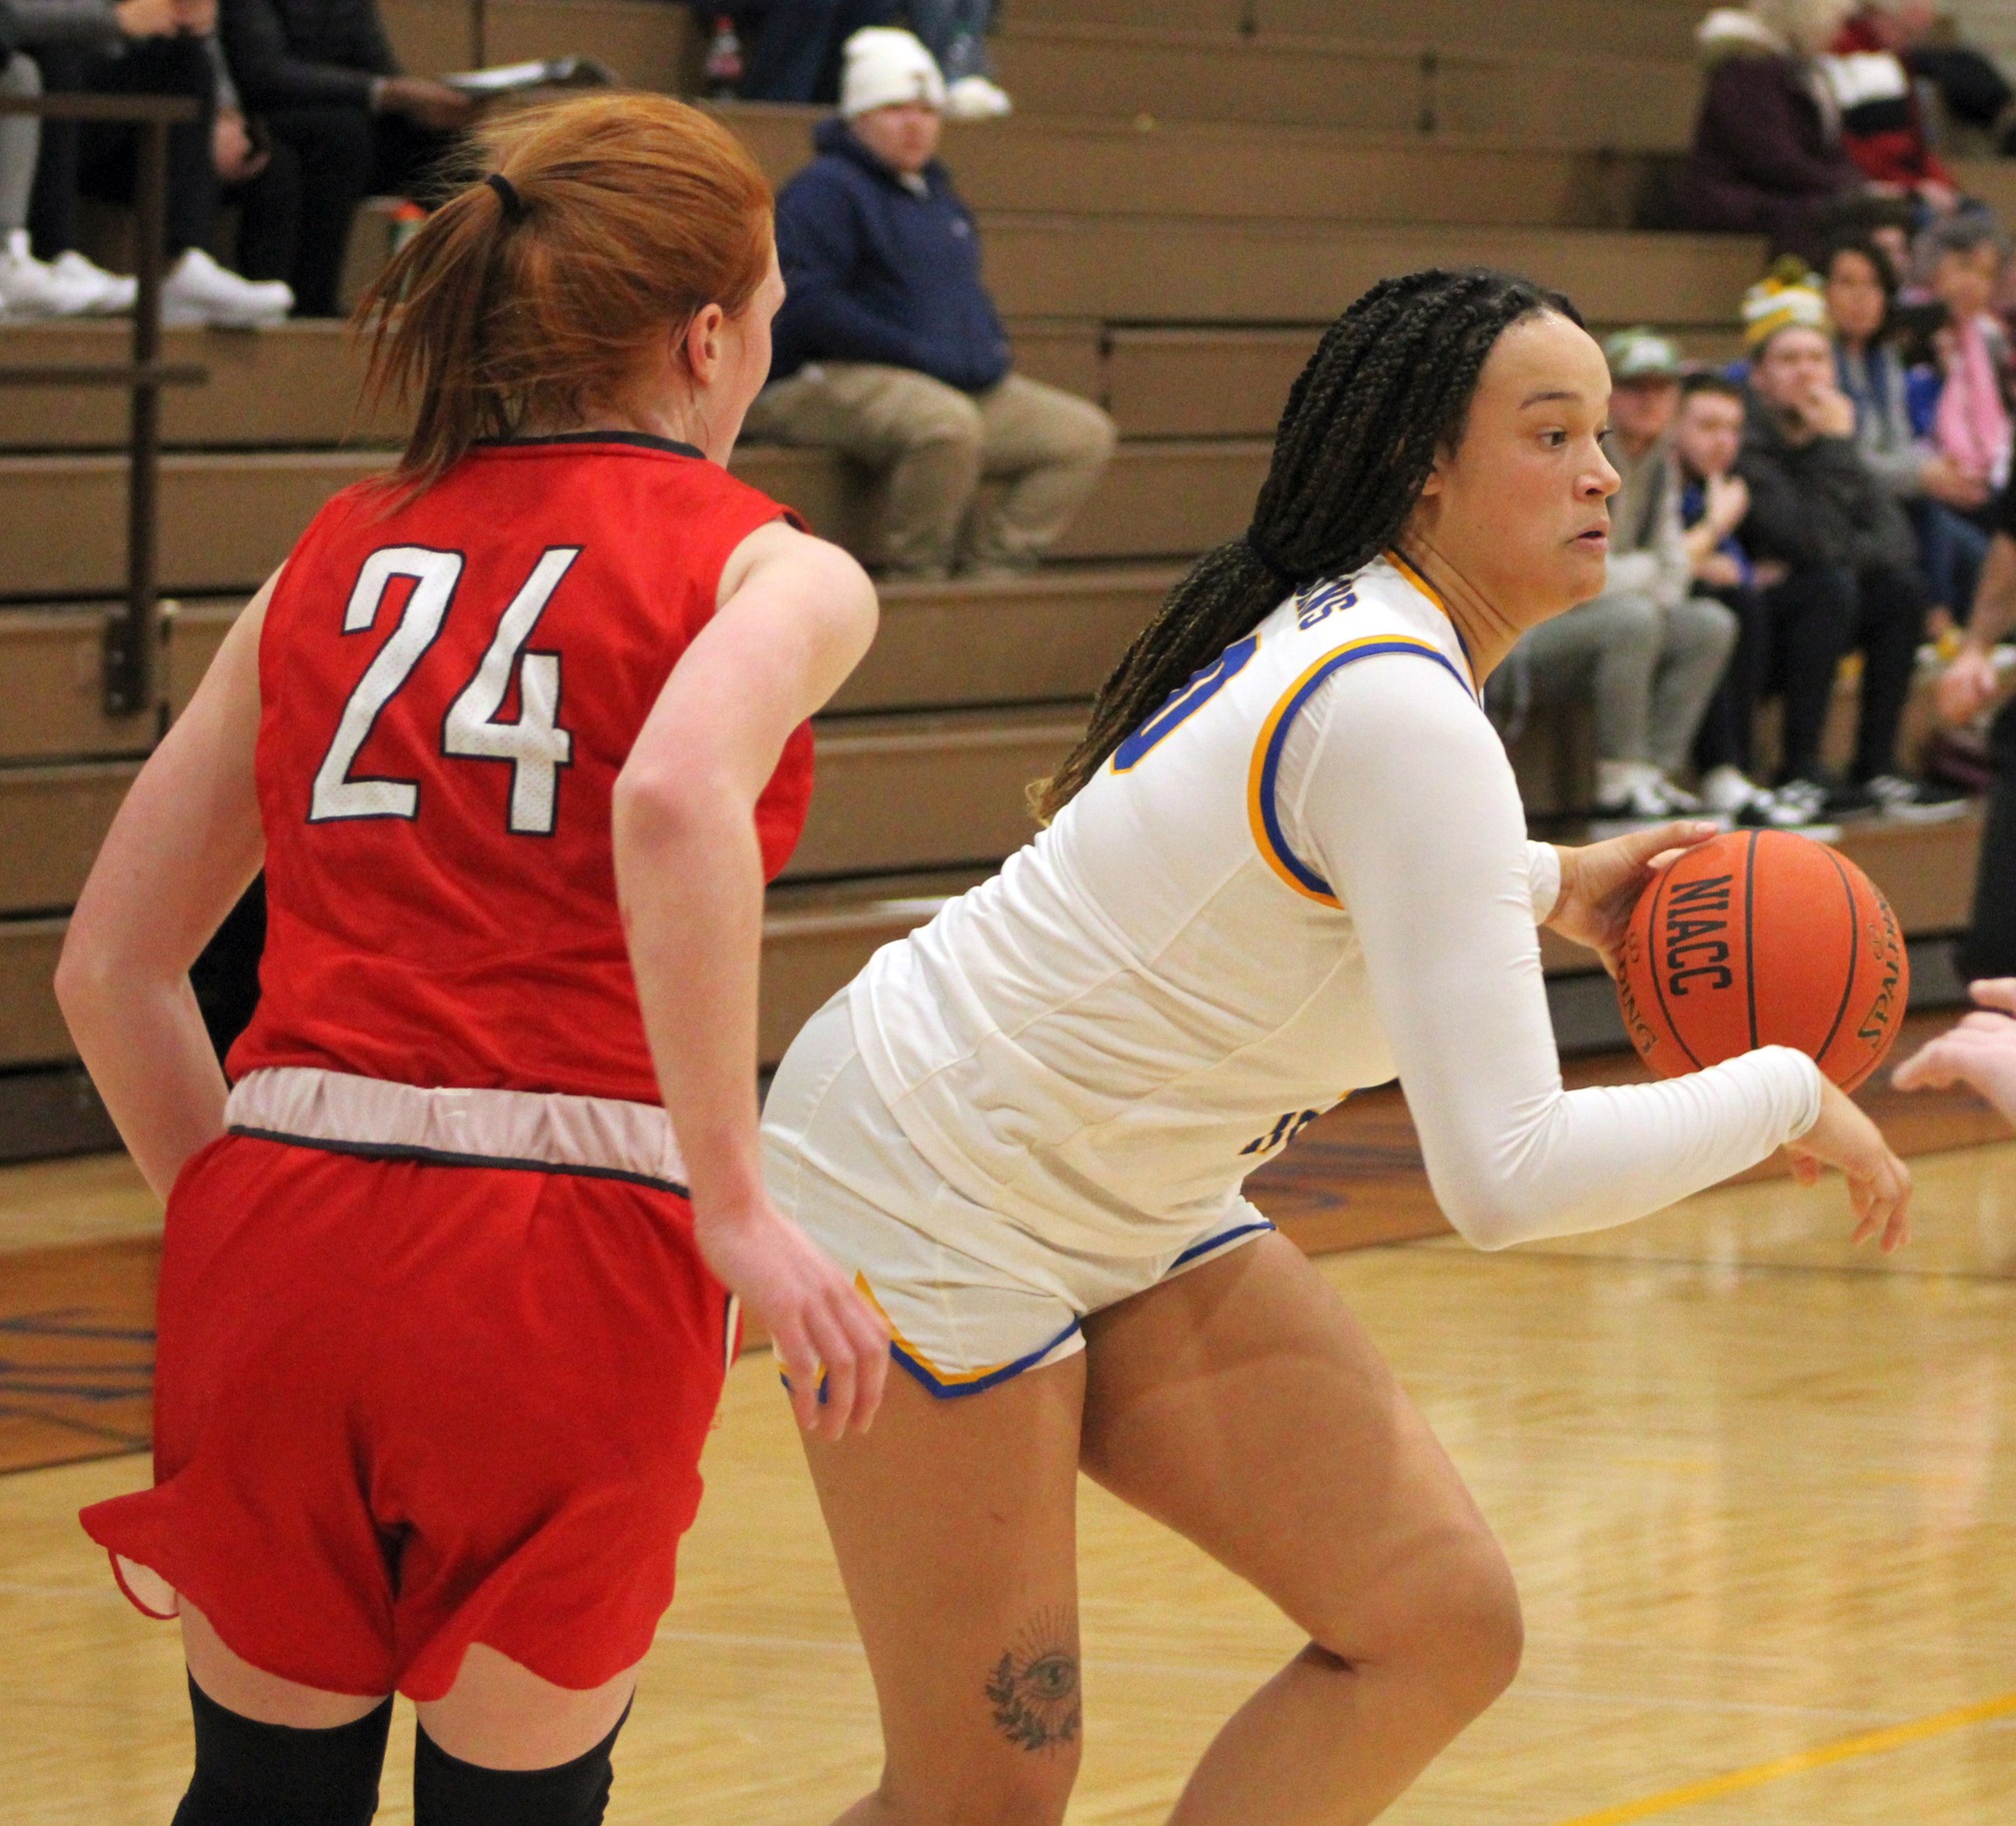 NIACC's Nora Francois looks to drive to the basket in first half of Saturday's game against Northeast CC.